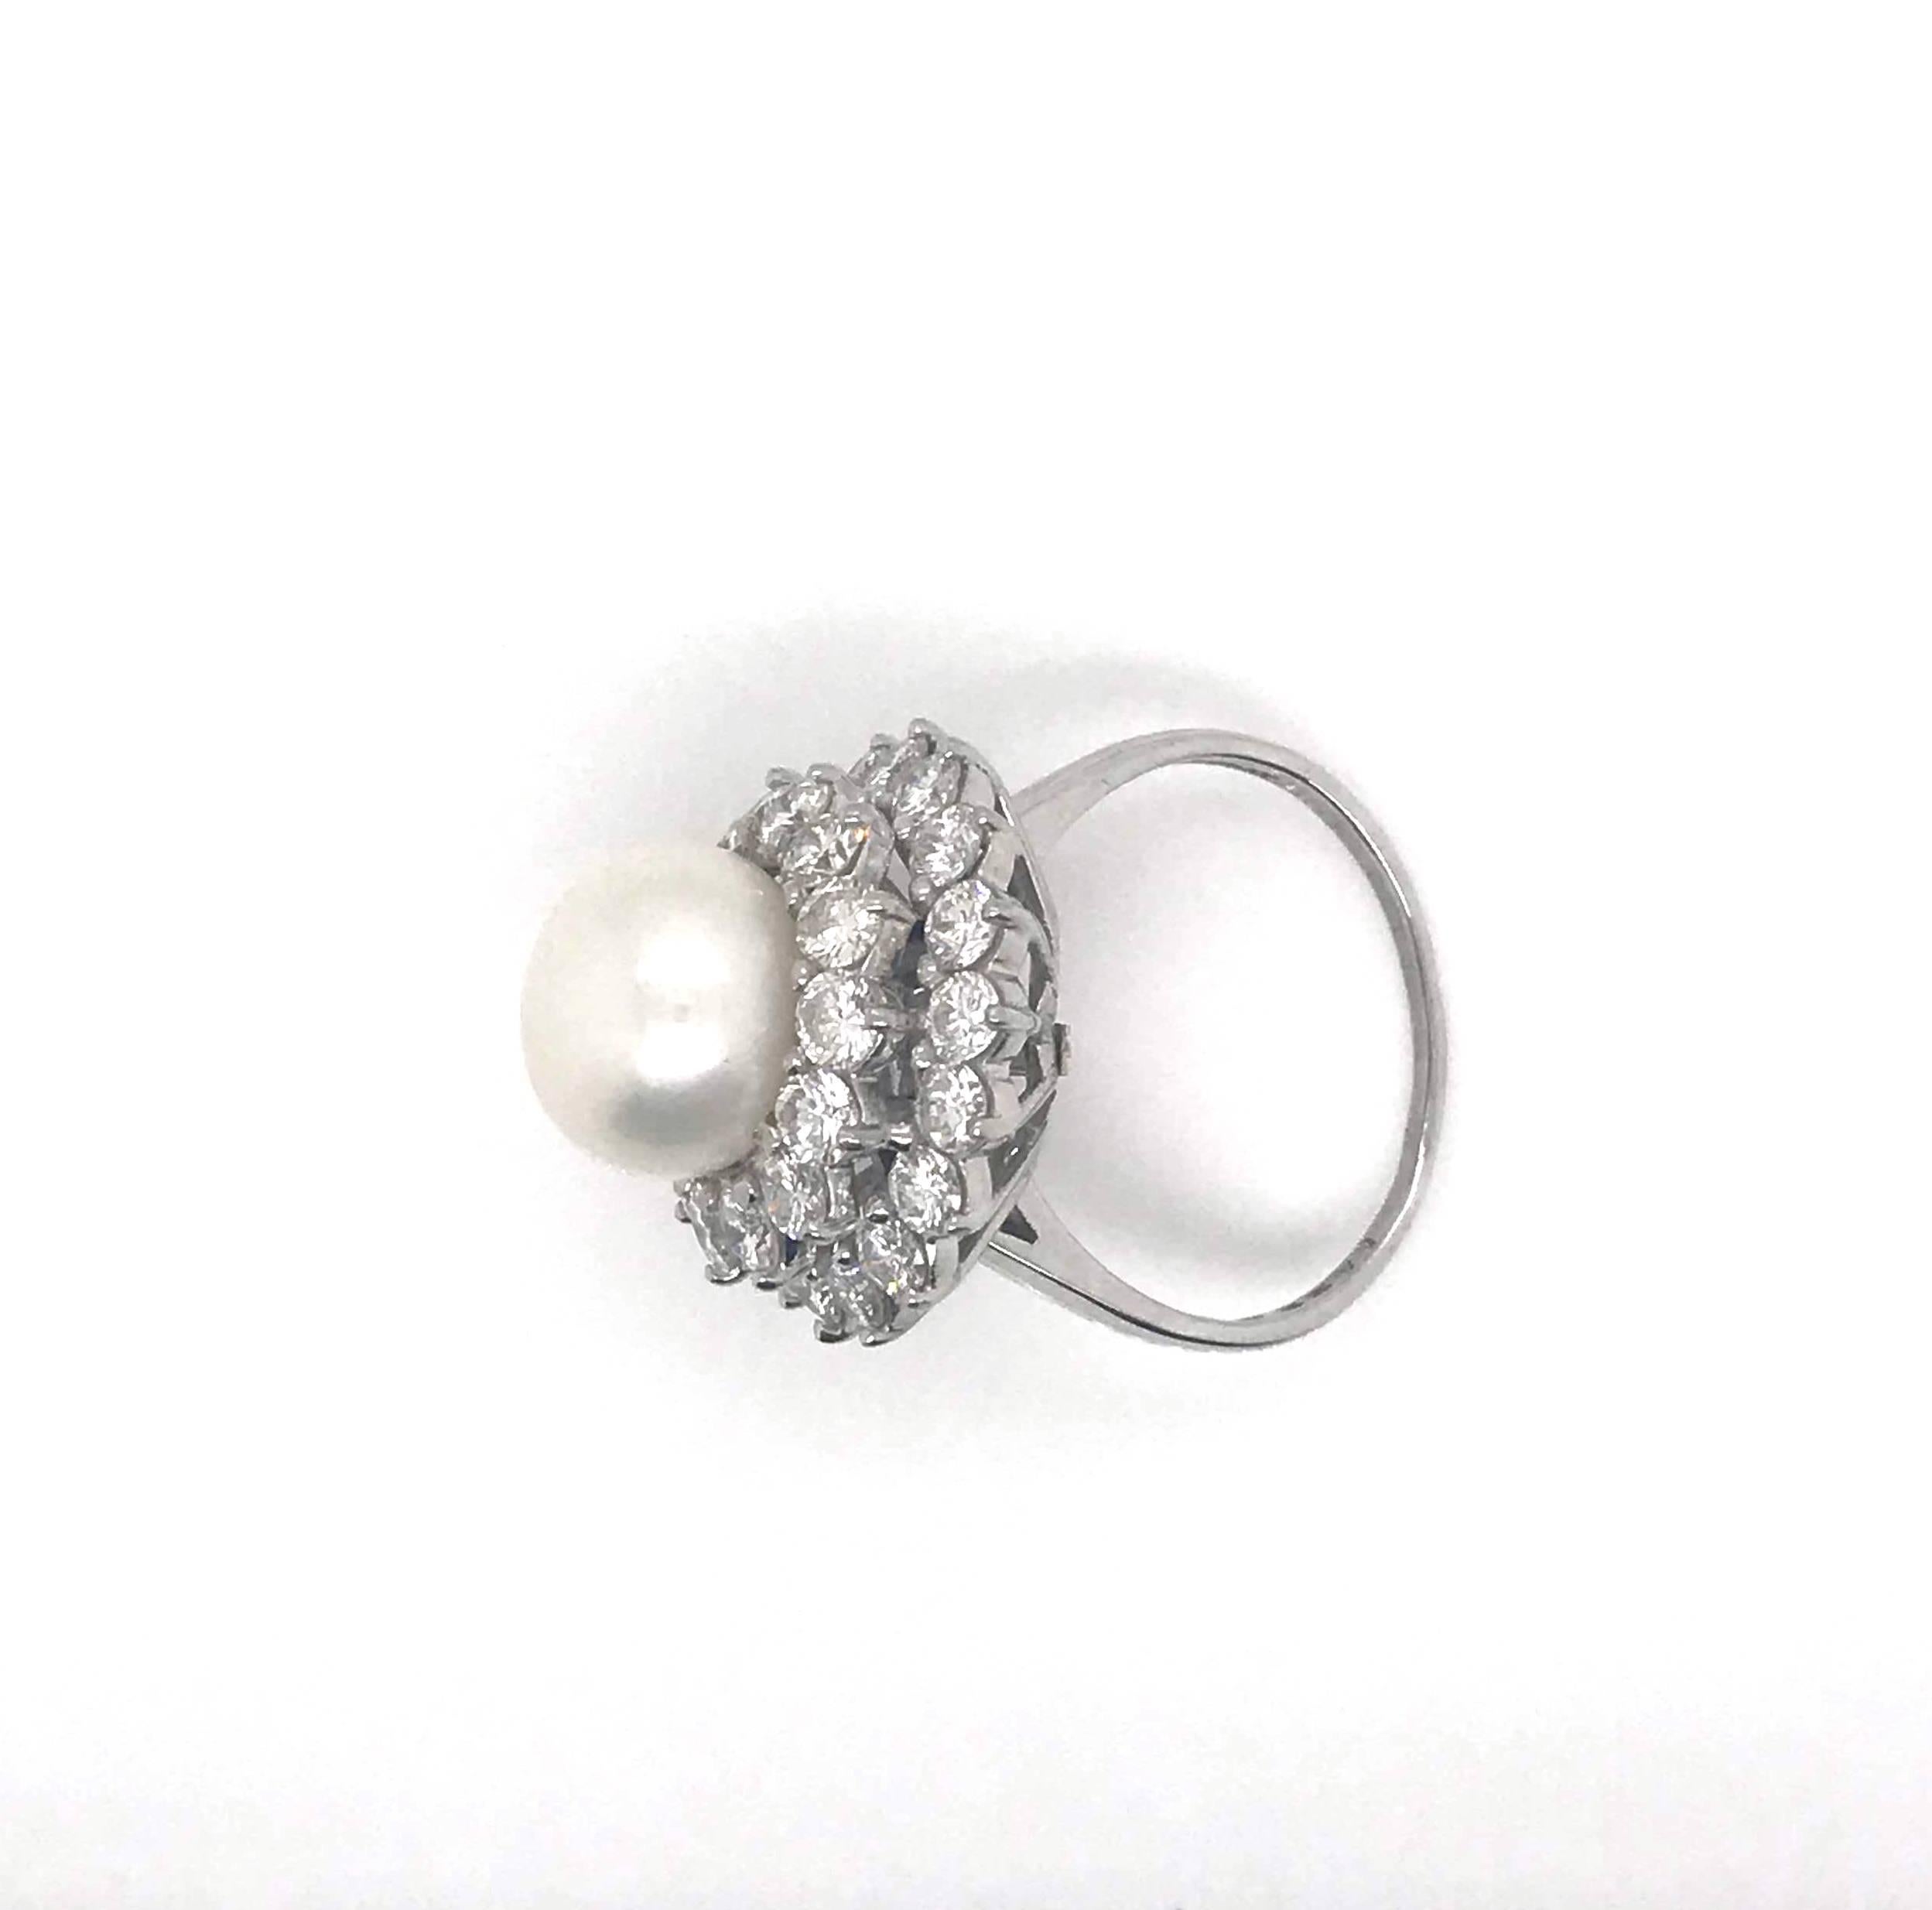 1 platinum vintage princess style modular dress ring/pendant. The shank can be detached from the ring so the setting becomes a pendant. The setting is centrally set with a button-shaped south sea cultured peal approx. 11mm. The pearl has a very good